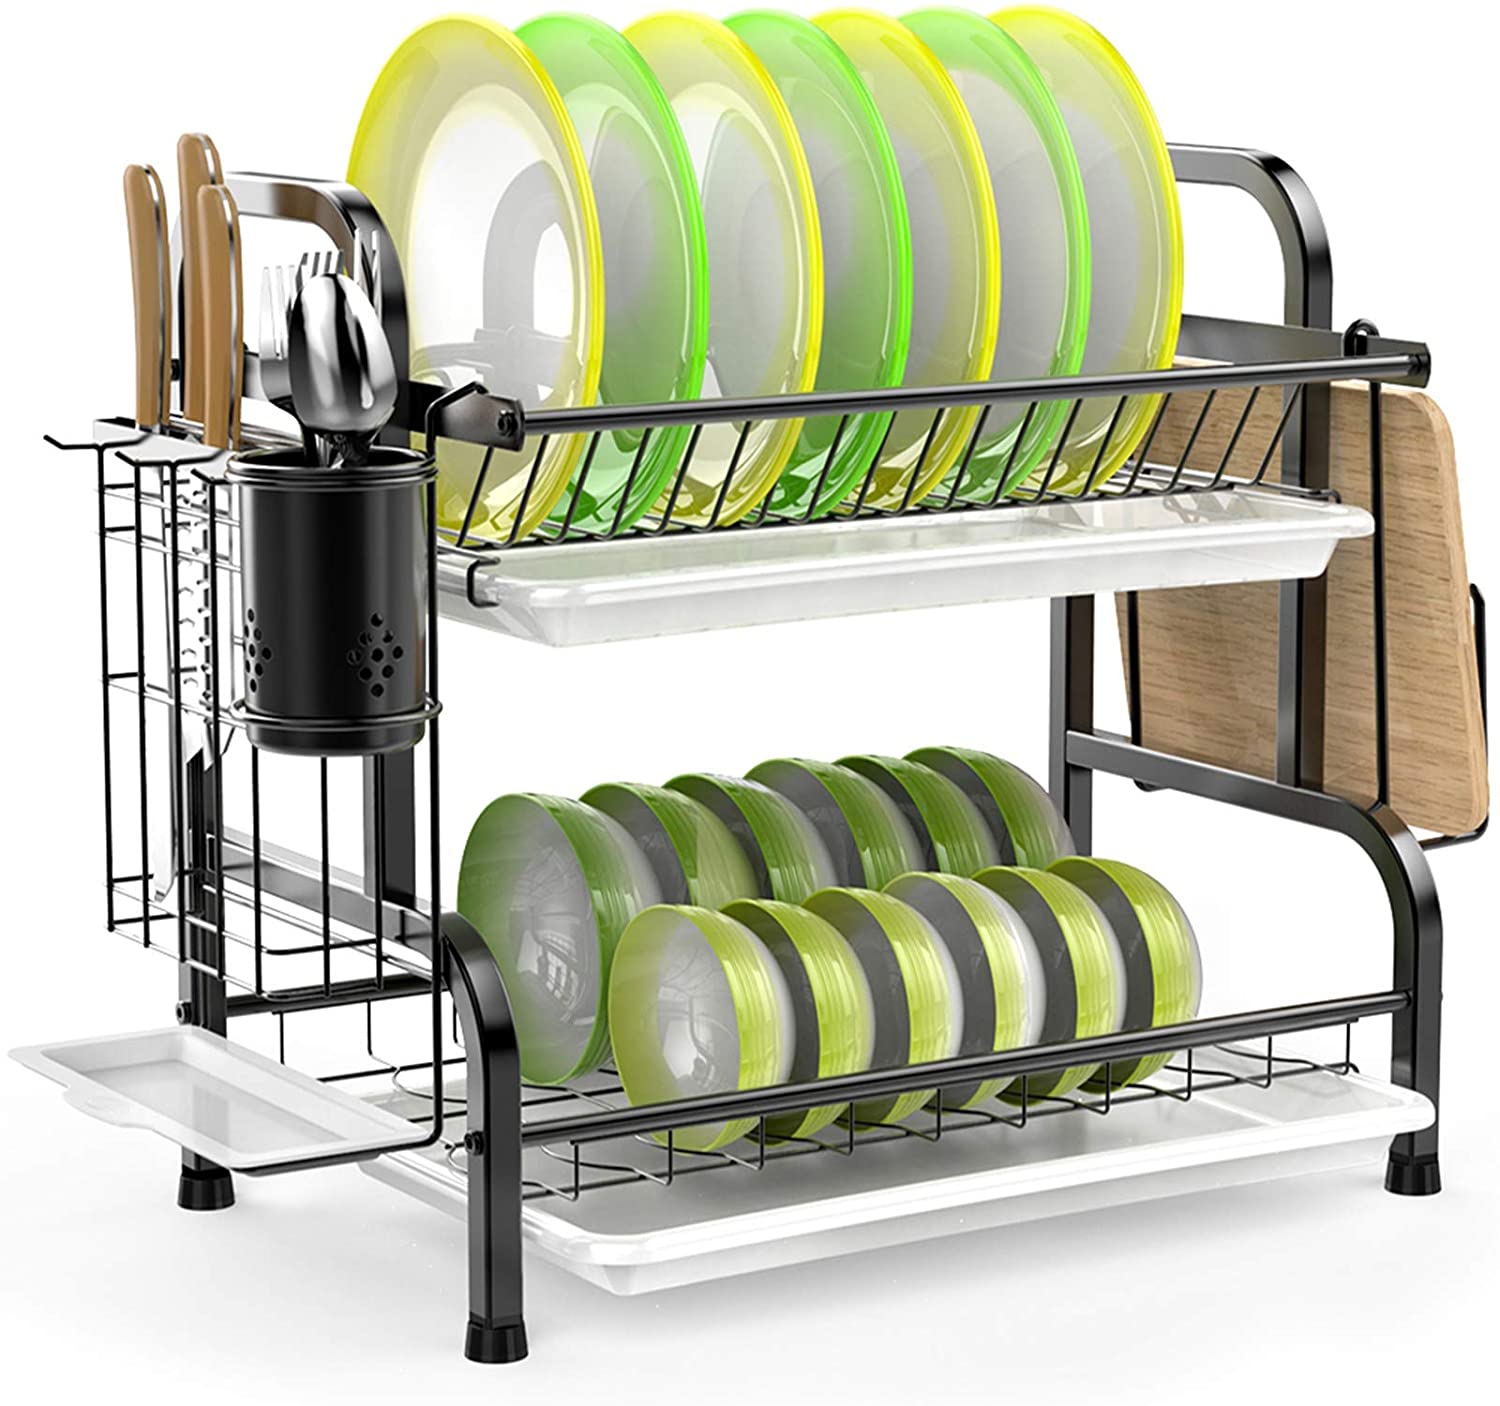 Review of Dish Drying Rack, iSPECLE 304 Stainless Steel 2-Tier Dish Rack